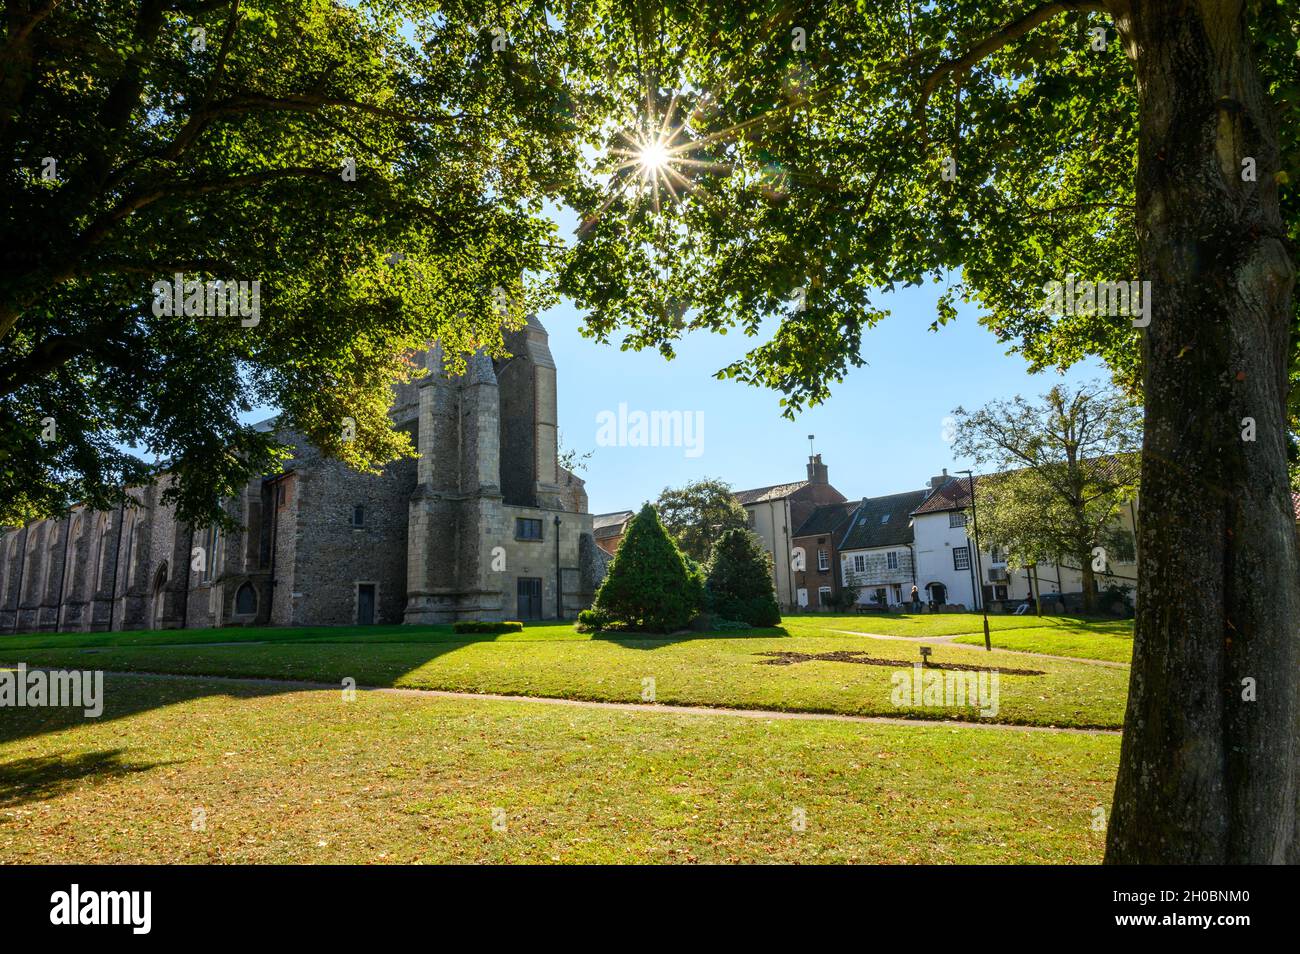 The sun shines brightly through the leaves of trees in front of St Nicholas church green in North Walsham, Norfolk, England. Stock Photo